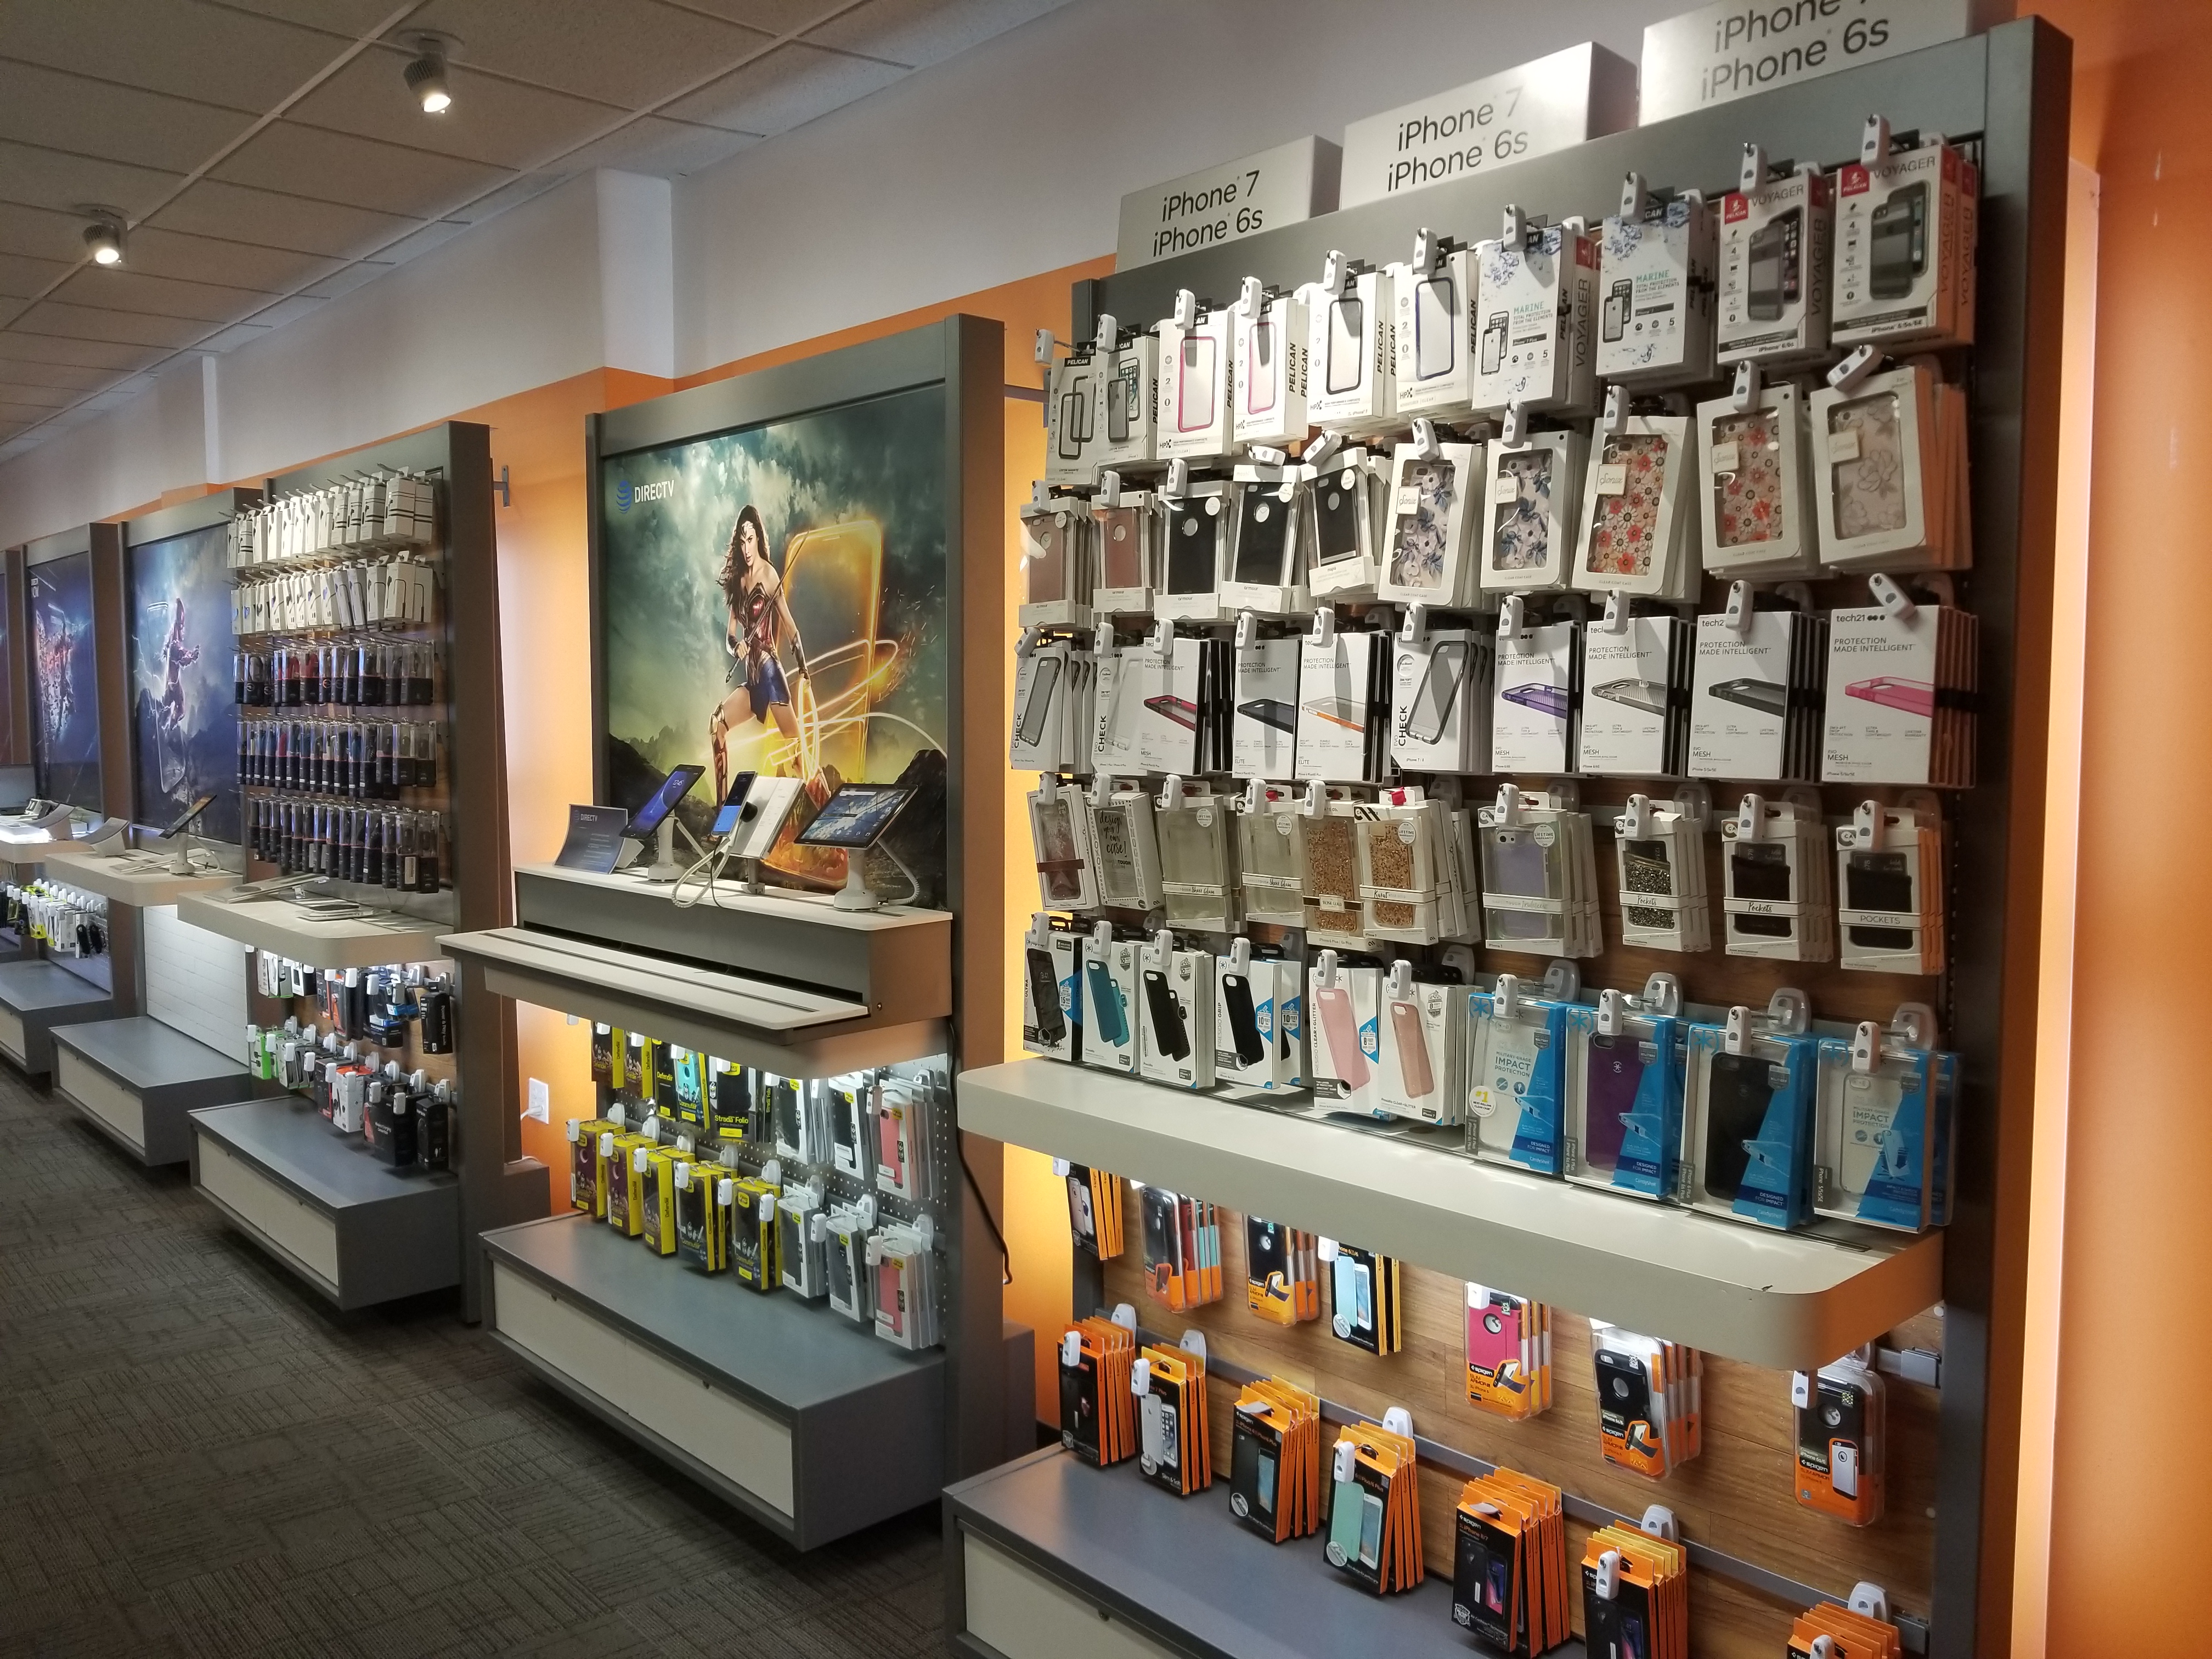 AT&T Store Photo